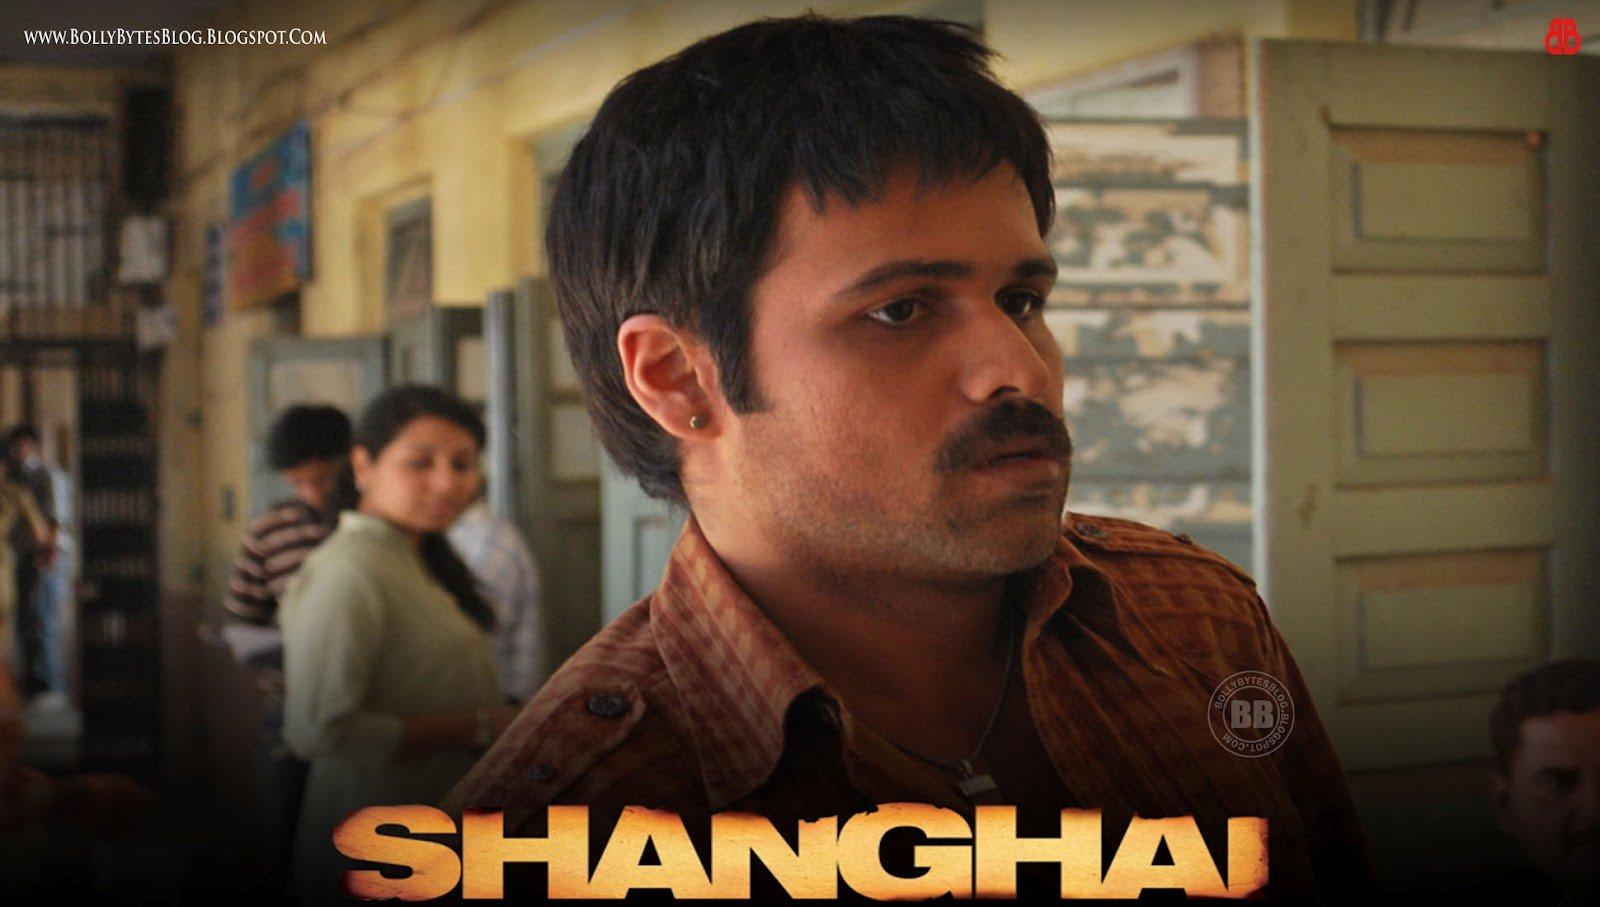 Shanghai: In this gritty political thriller, Emraan Hashmi shines as Jogi, a morally ambiguous character caught up in a web of corruption and deceit.